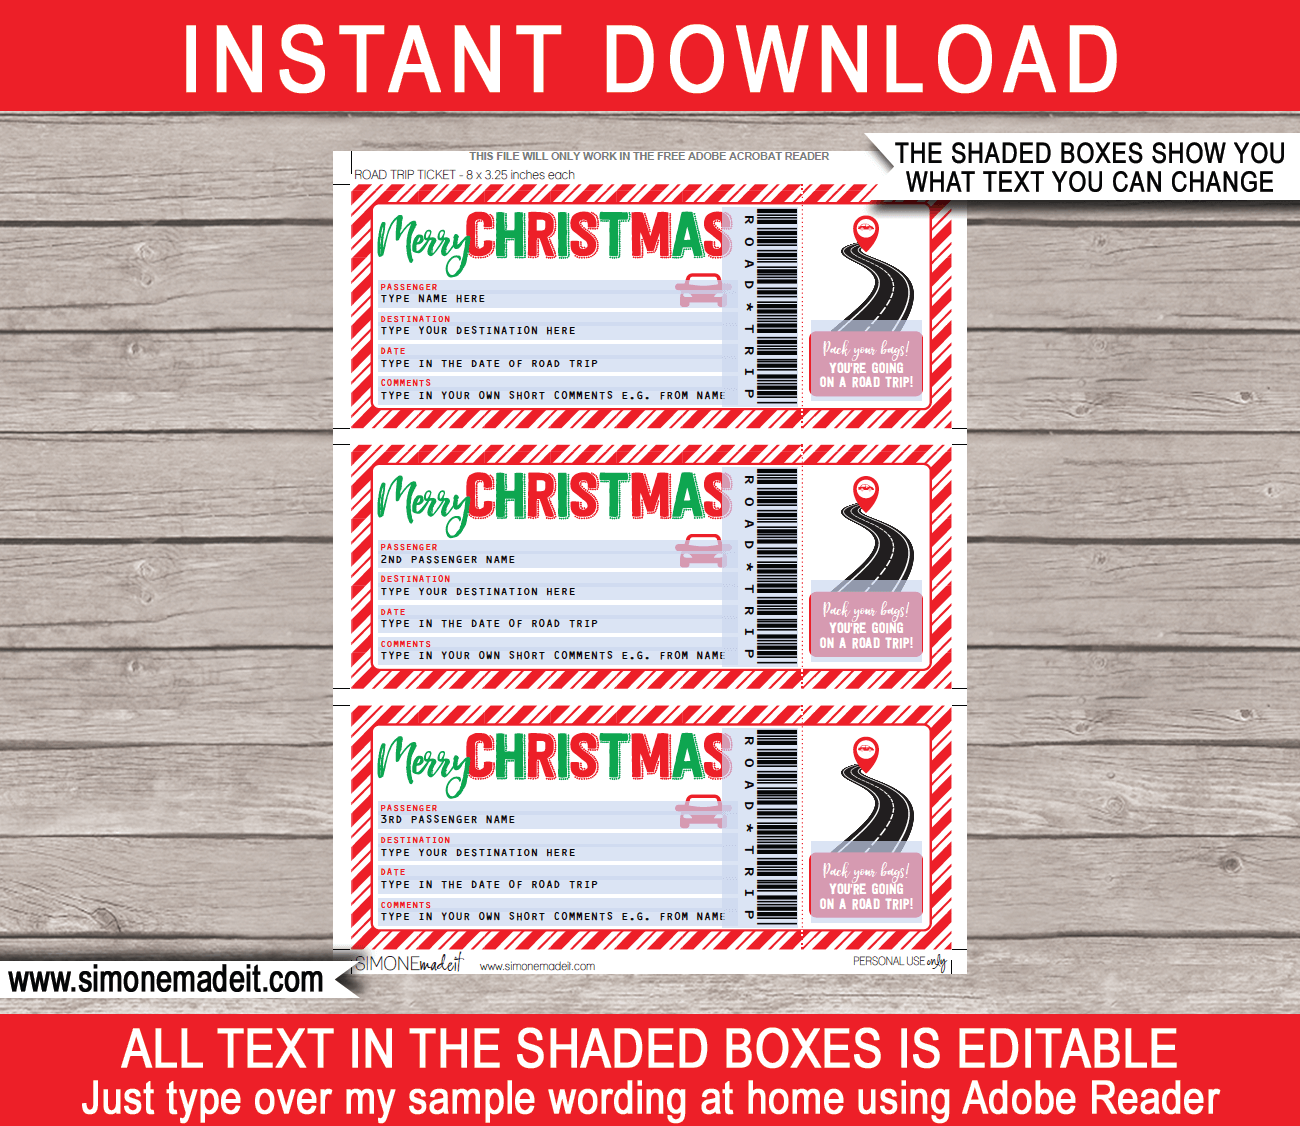 My take on the ticket template made this as a Christmas gift for a friend!  : r/SwiftieMerch